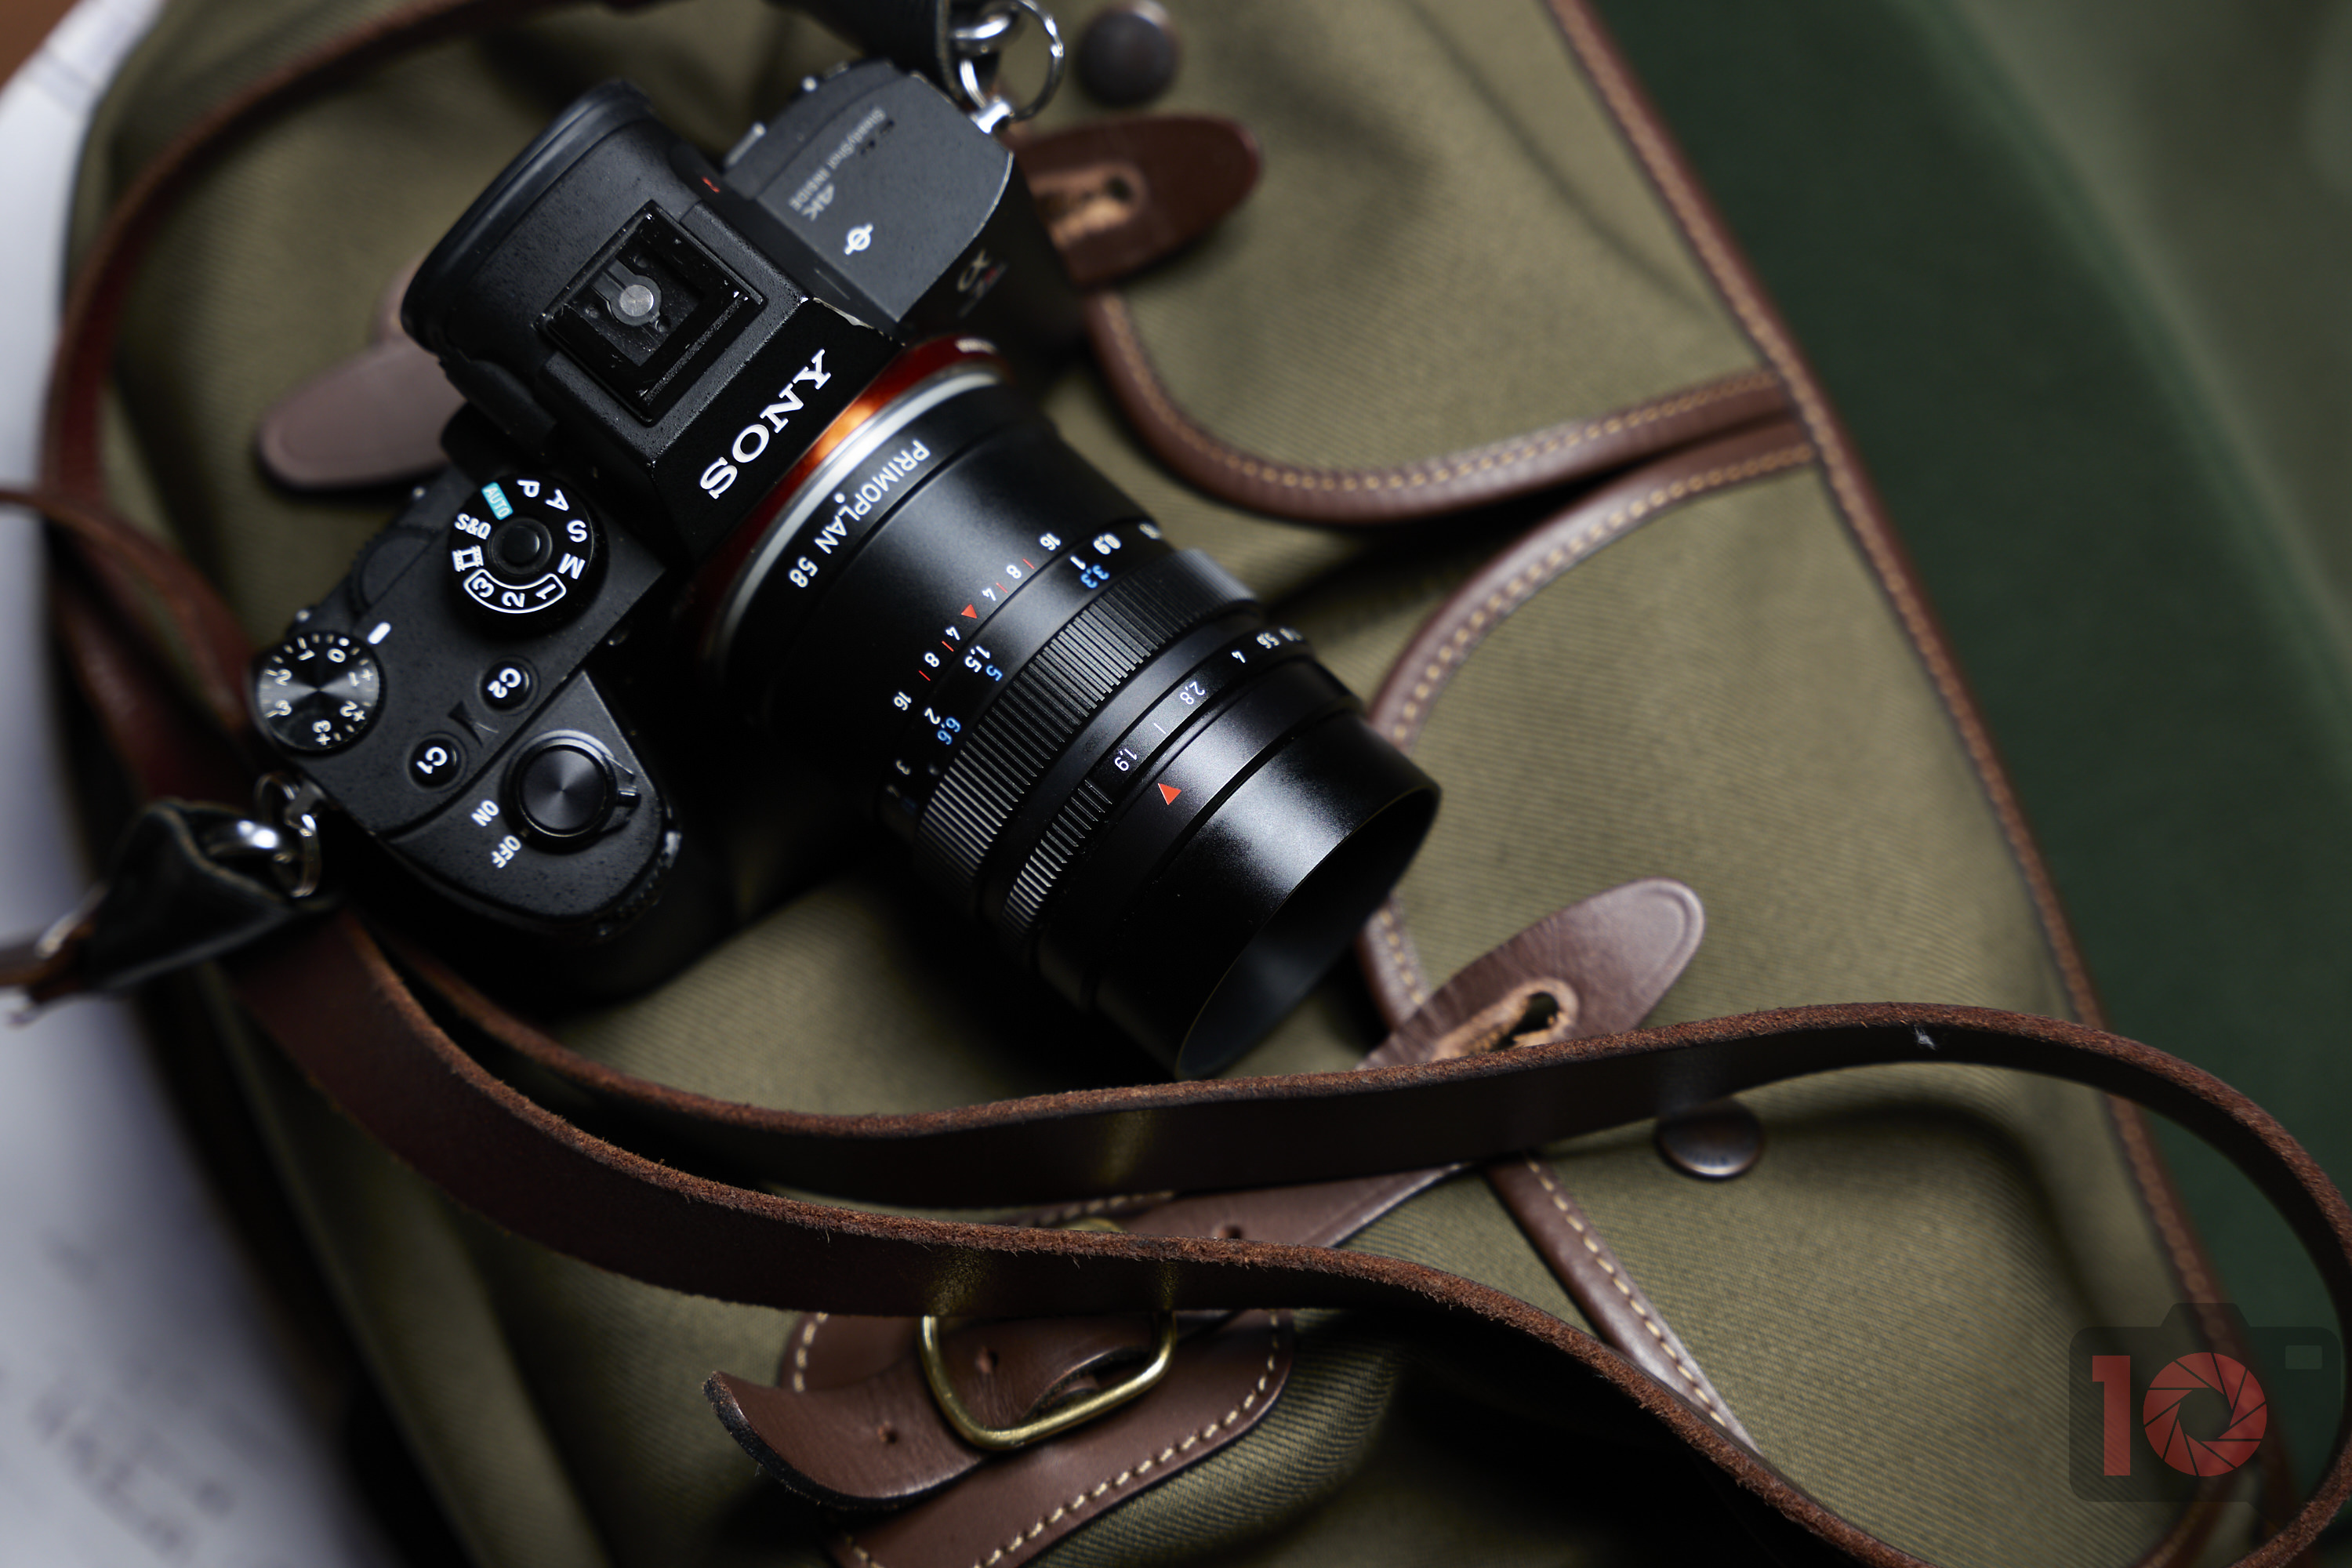 Chris Gampat The Phoblographer Meyer Optik 58mm f1.9 II review product images 2.81-100s200 1